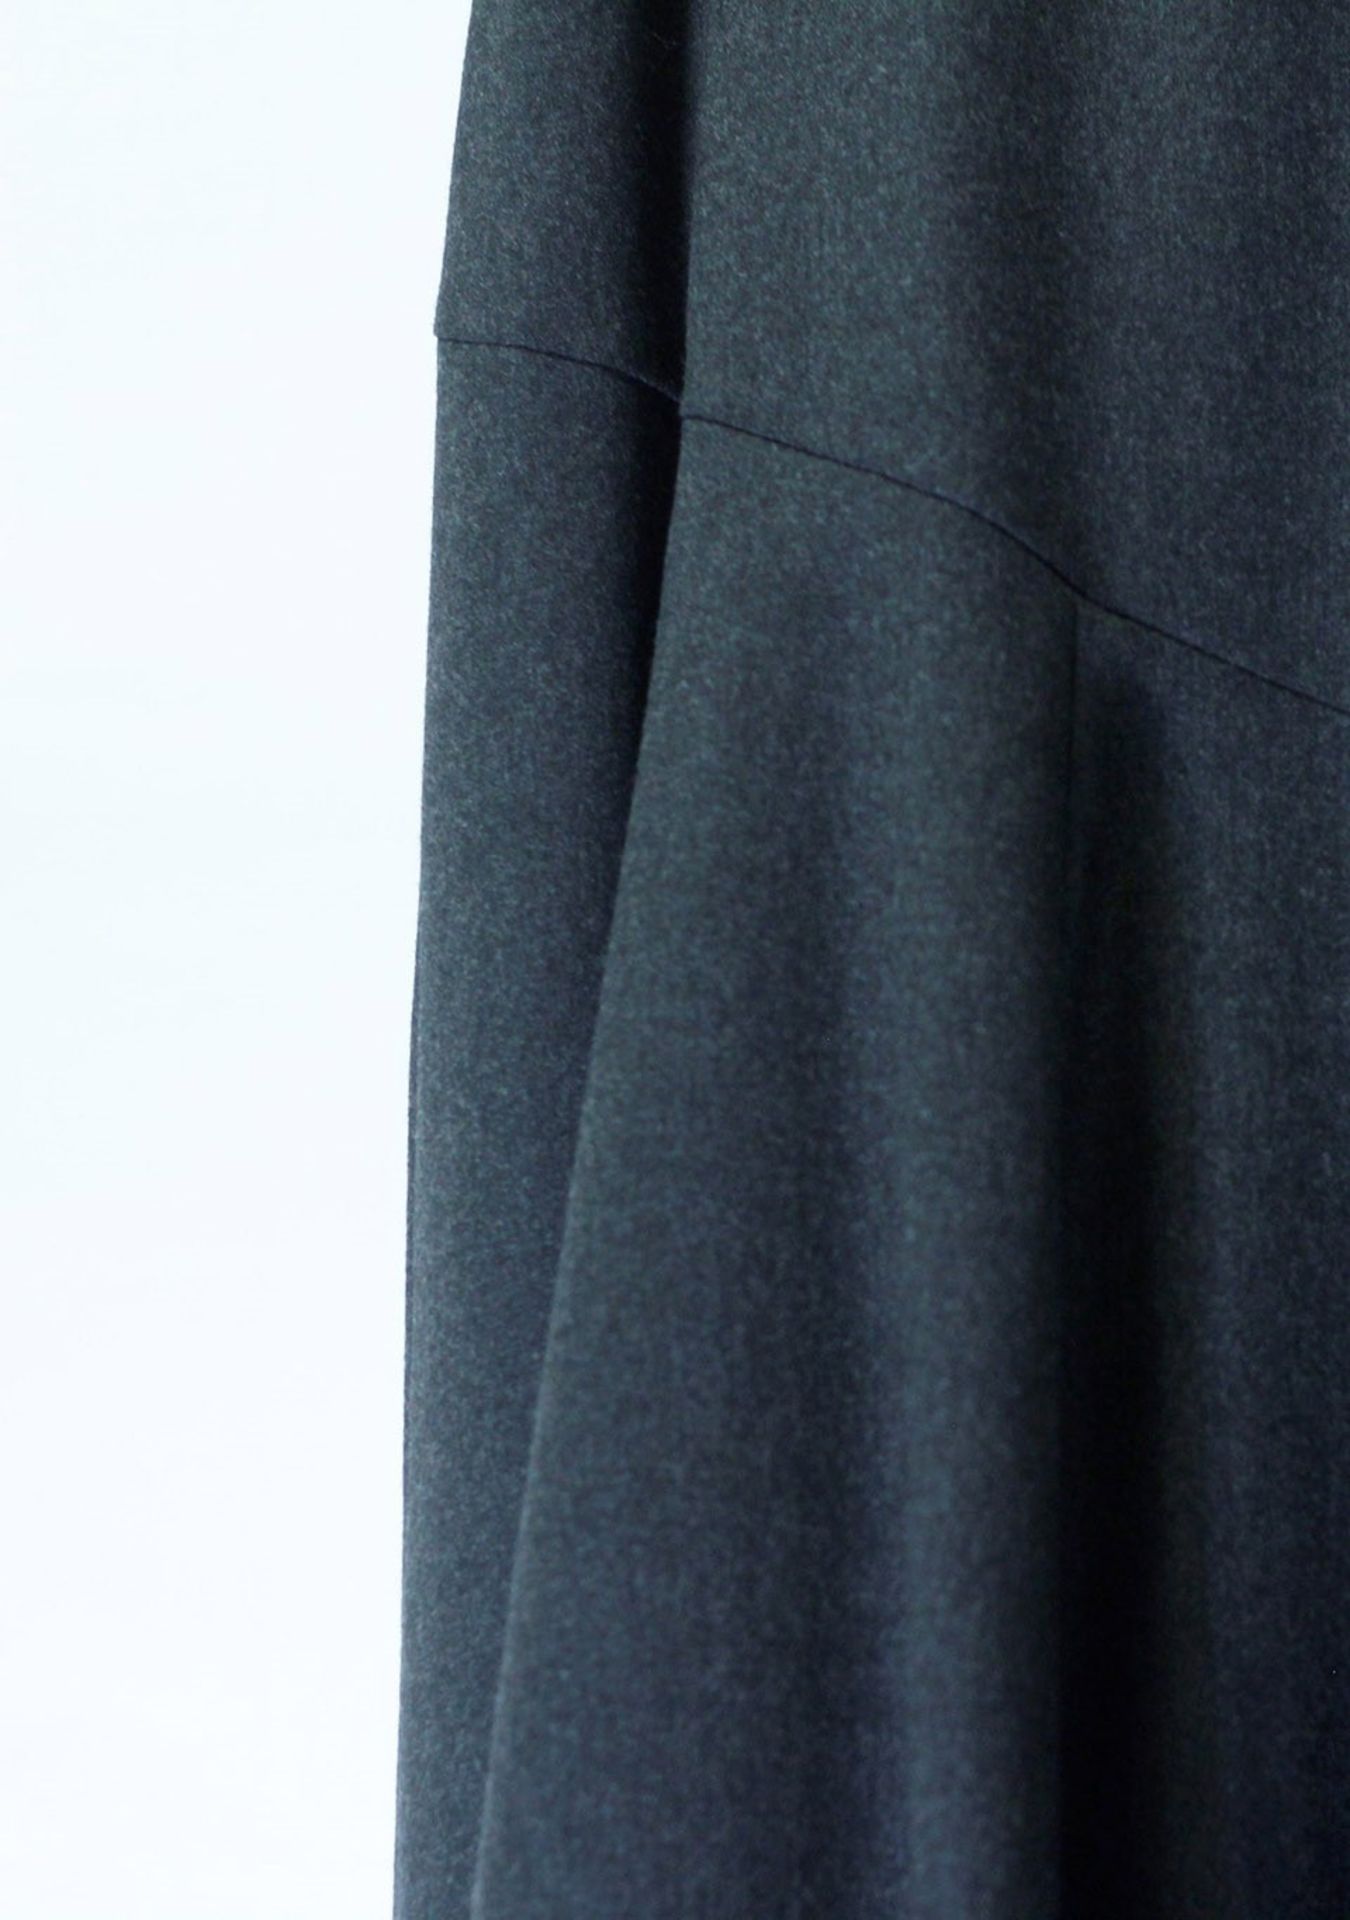 1 x Anne Belin Dark Grey Skirt - Size: 18 - Material: 100% Wool - From a High End Clothing - Image 4 of 9